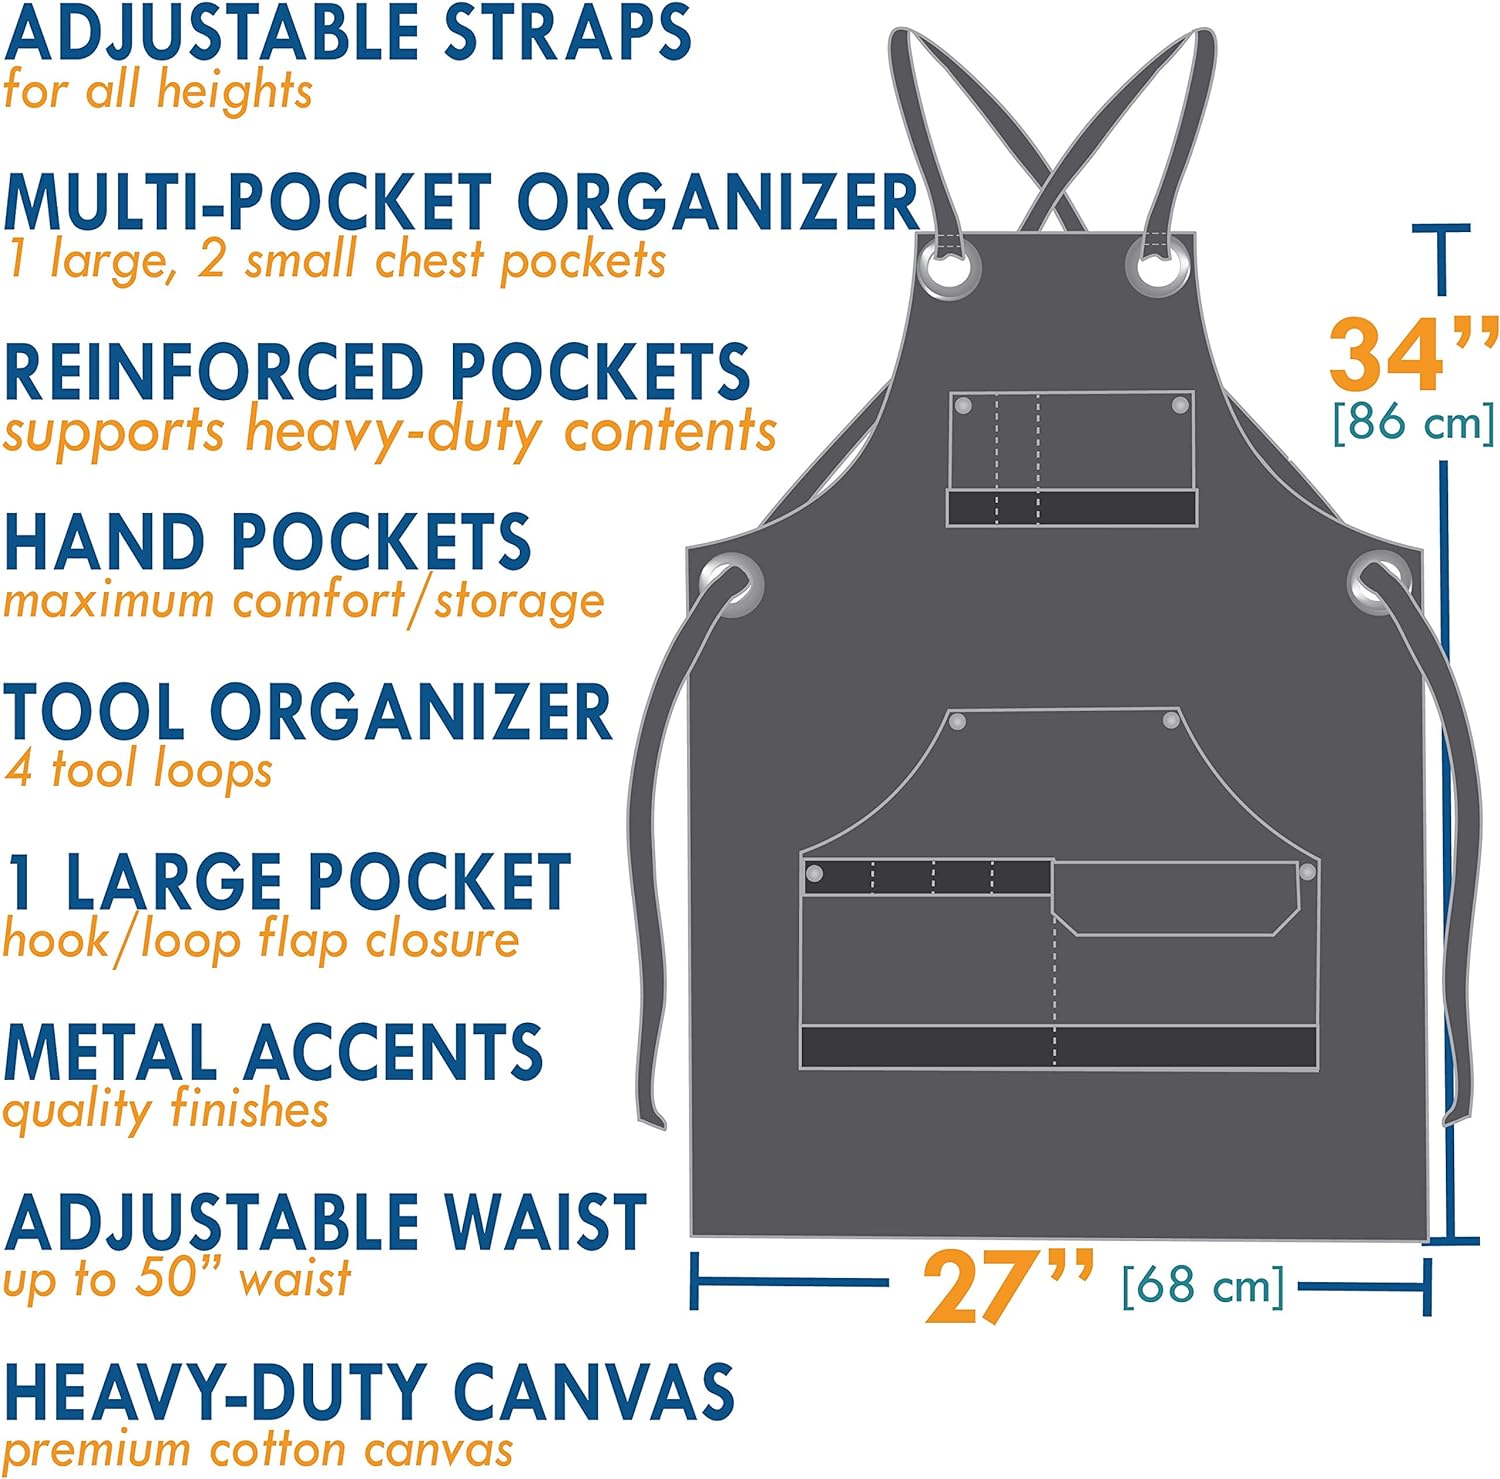 Rugged Tools Work Apron - Heavy Duty Canvas Shop Apron with Tool Pockets (Black)